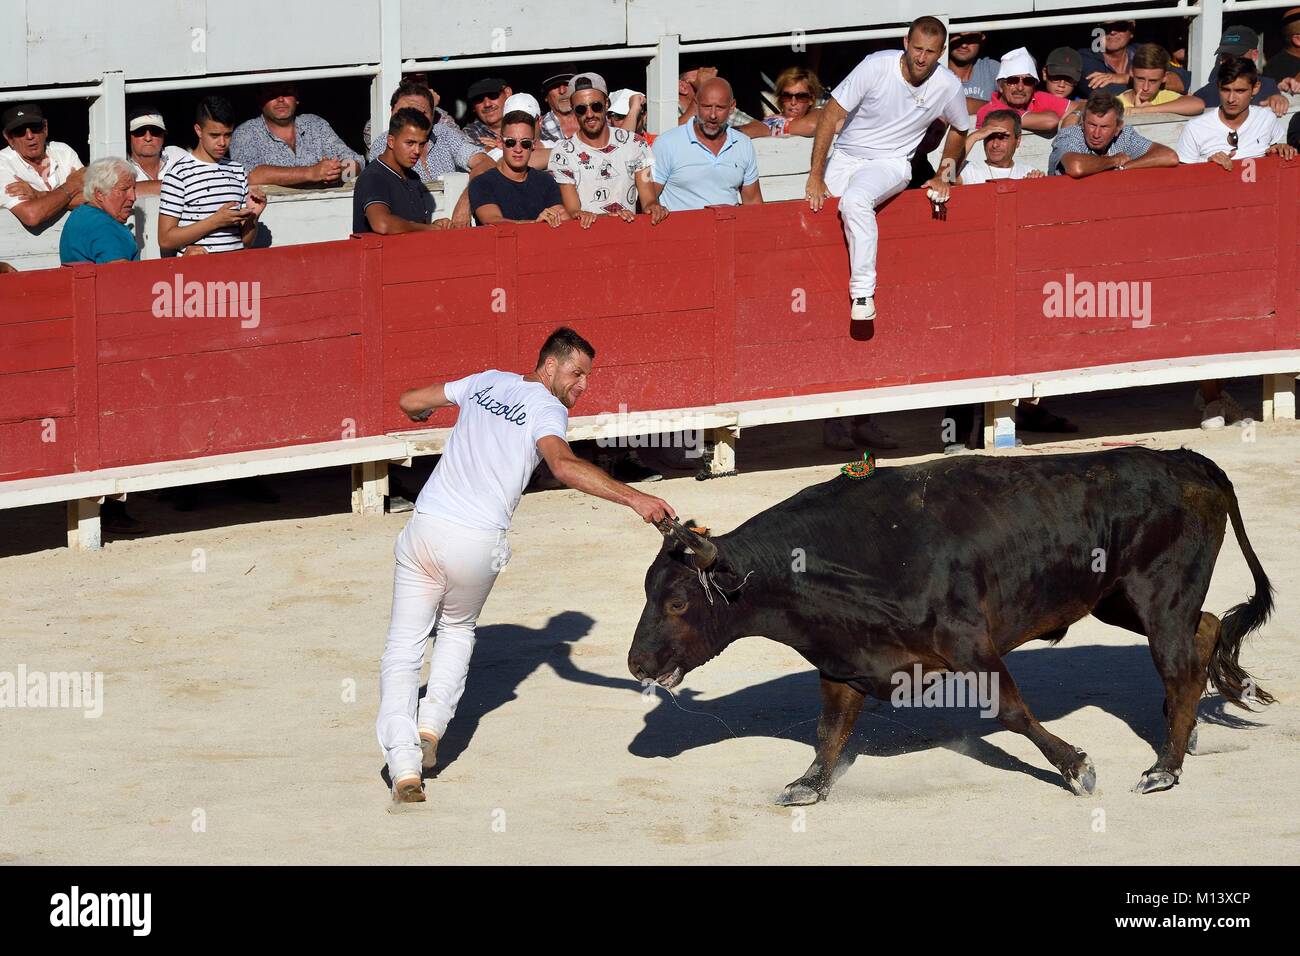 France, Bouches du Rhone, Arles, the course camarguaise of the Cocarde d'Or at the Arenas, the raseteur Loic Auzolle trying to catch the award-winning attributes on the horns of the bull Stock Photo